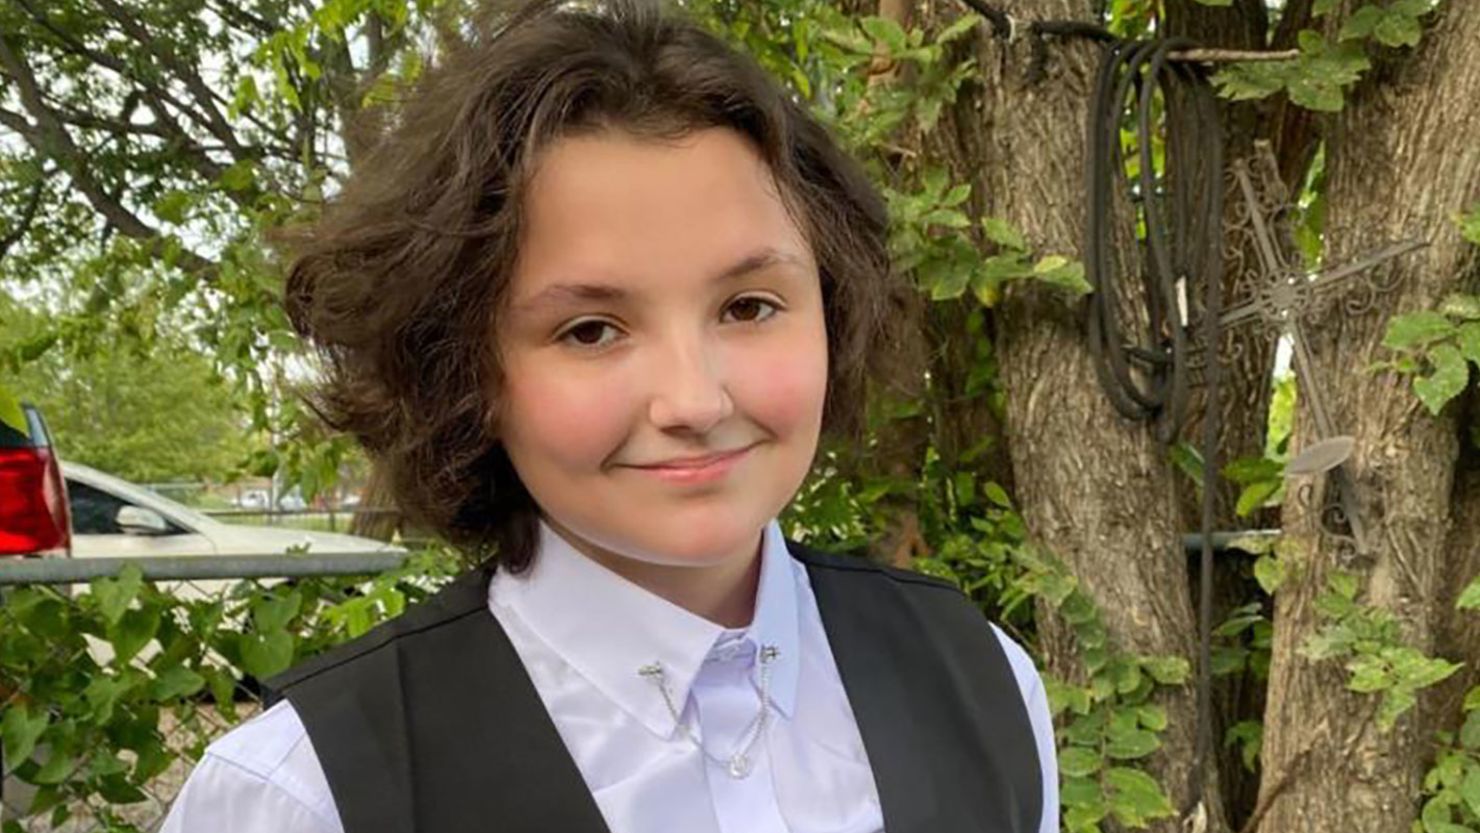 Nex Benedict, whose family says identified as nonbinary, died February 8, one day after they told their family they and a transgender student were involved in a fight with others at school.